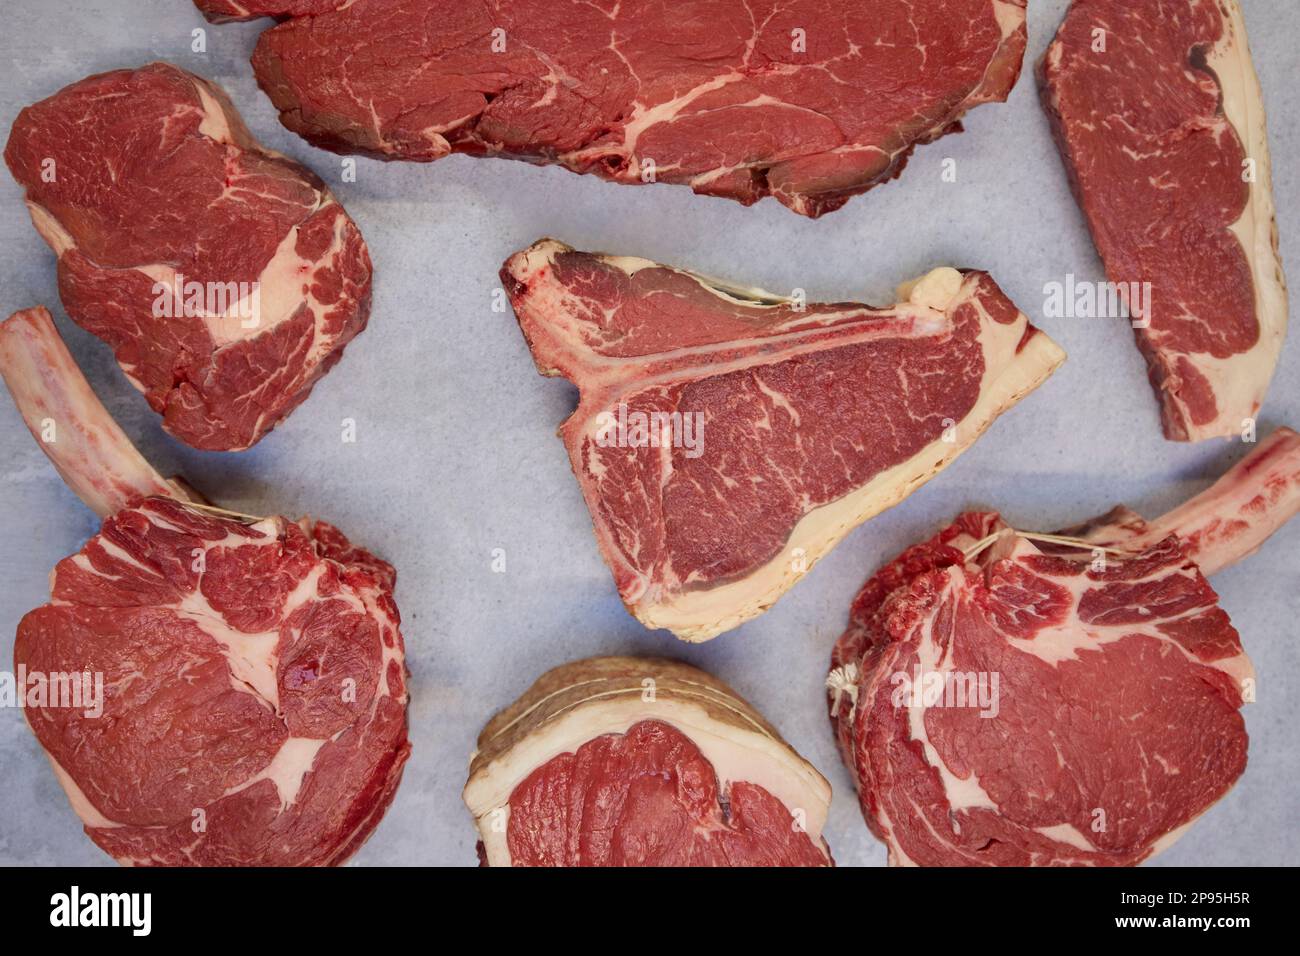 Overhead Shot Of Different Cuts Of Beef Steak On Background In Butcher's Shop Display Stock Photo